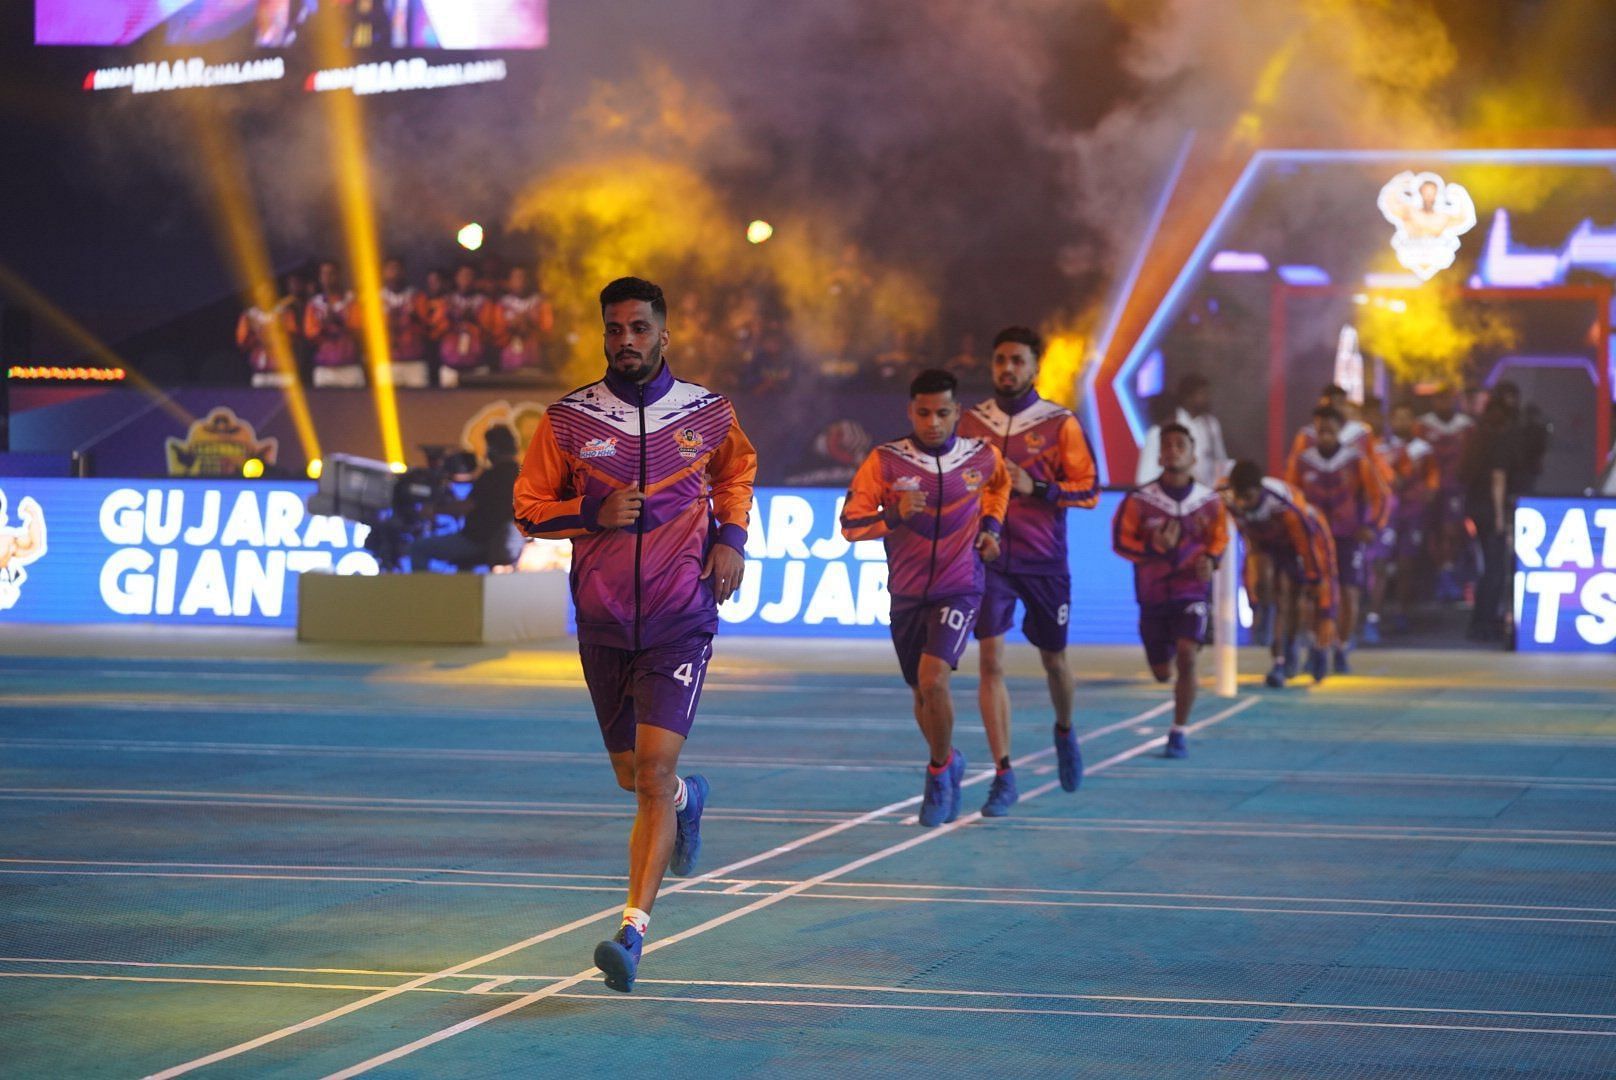 Can the Gujarat Giants book a place in the Ultimate Kho Kho 2022 Final? (Image: Twitter)